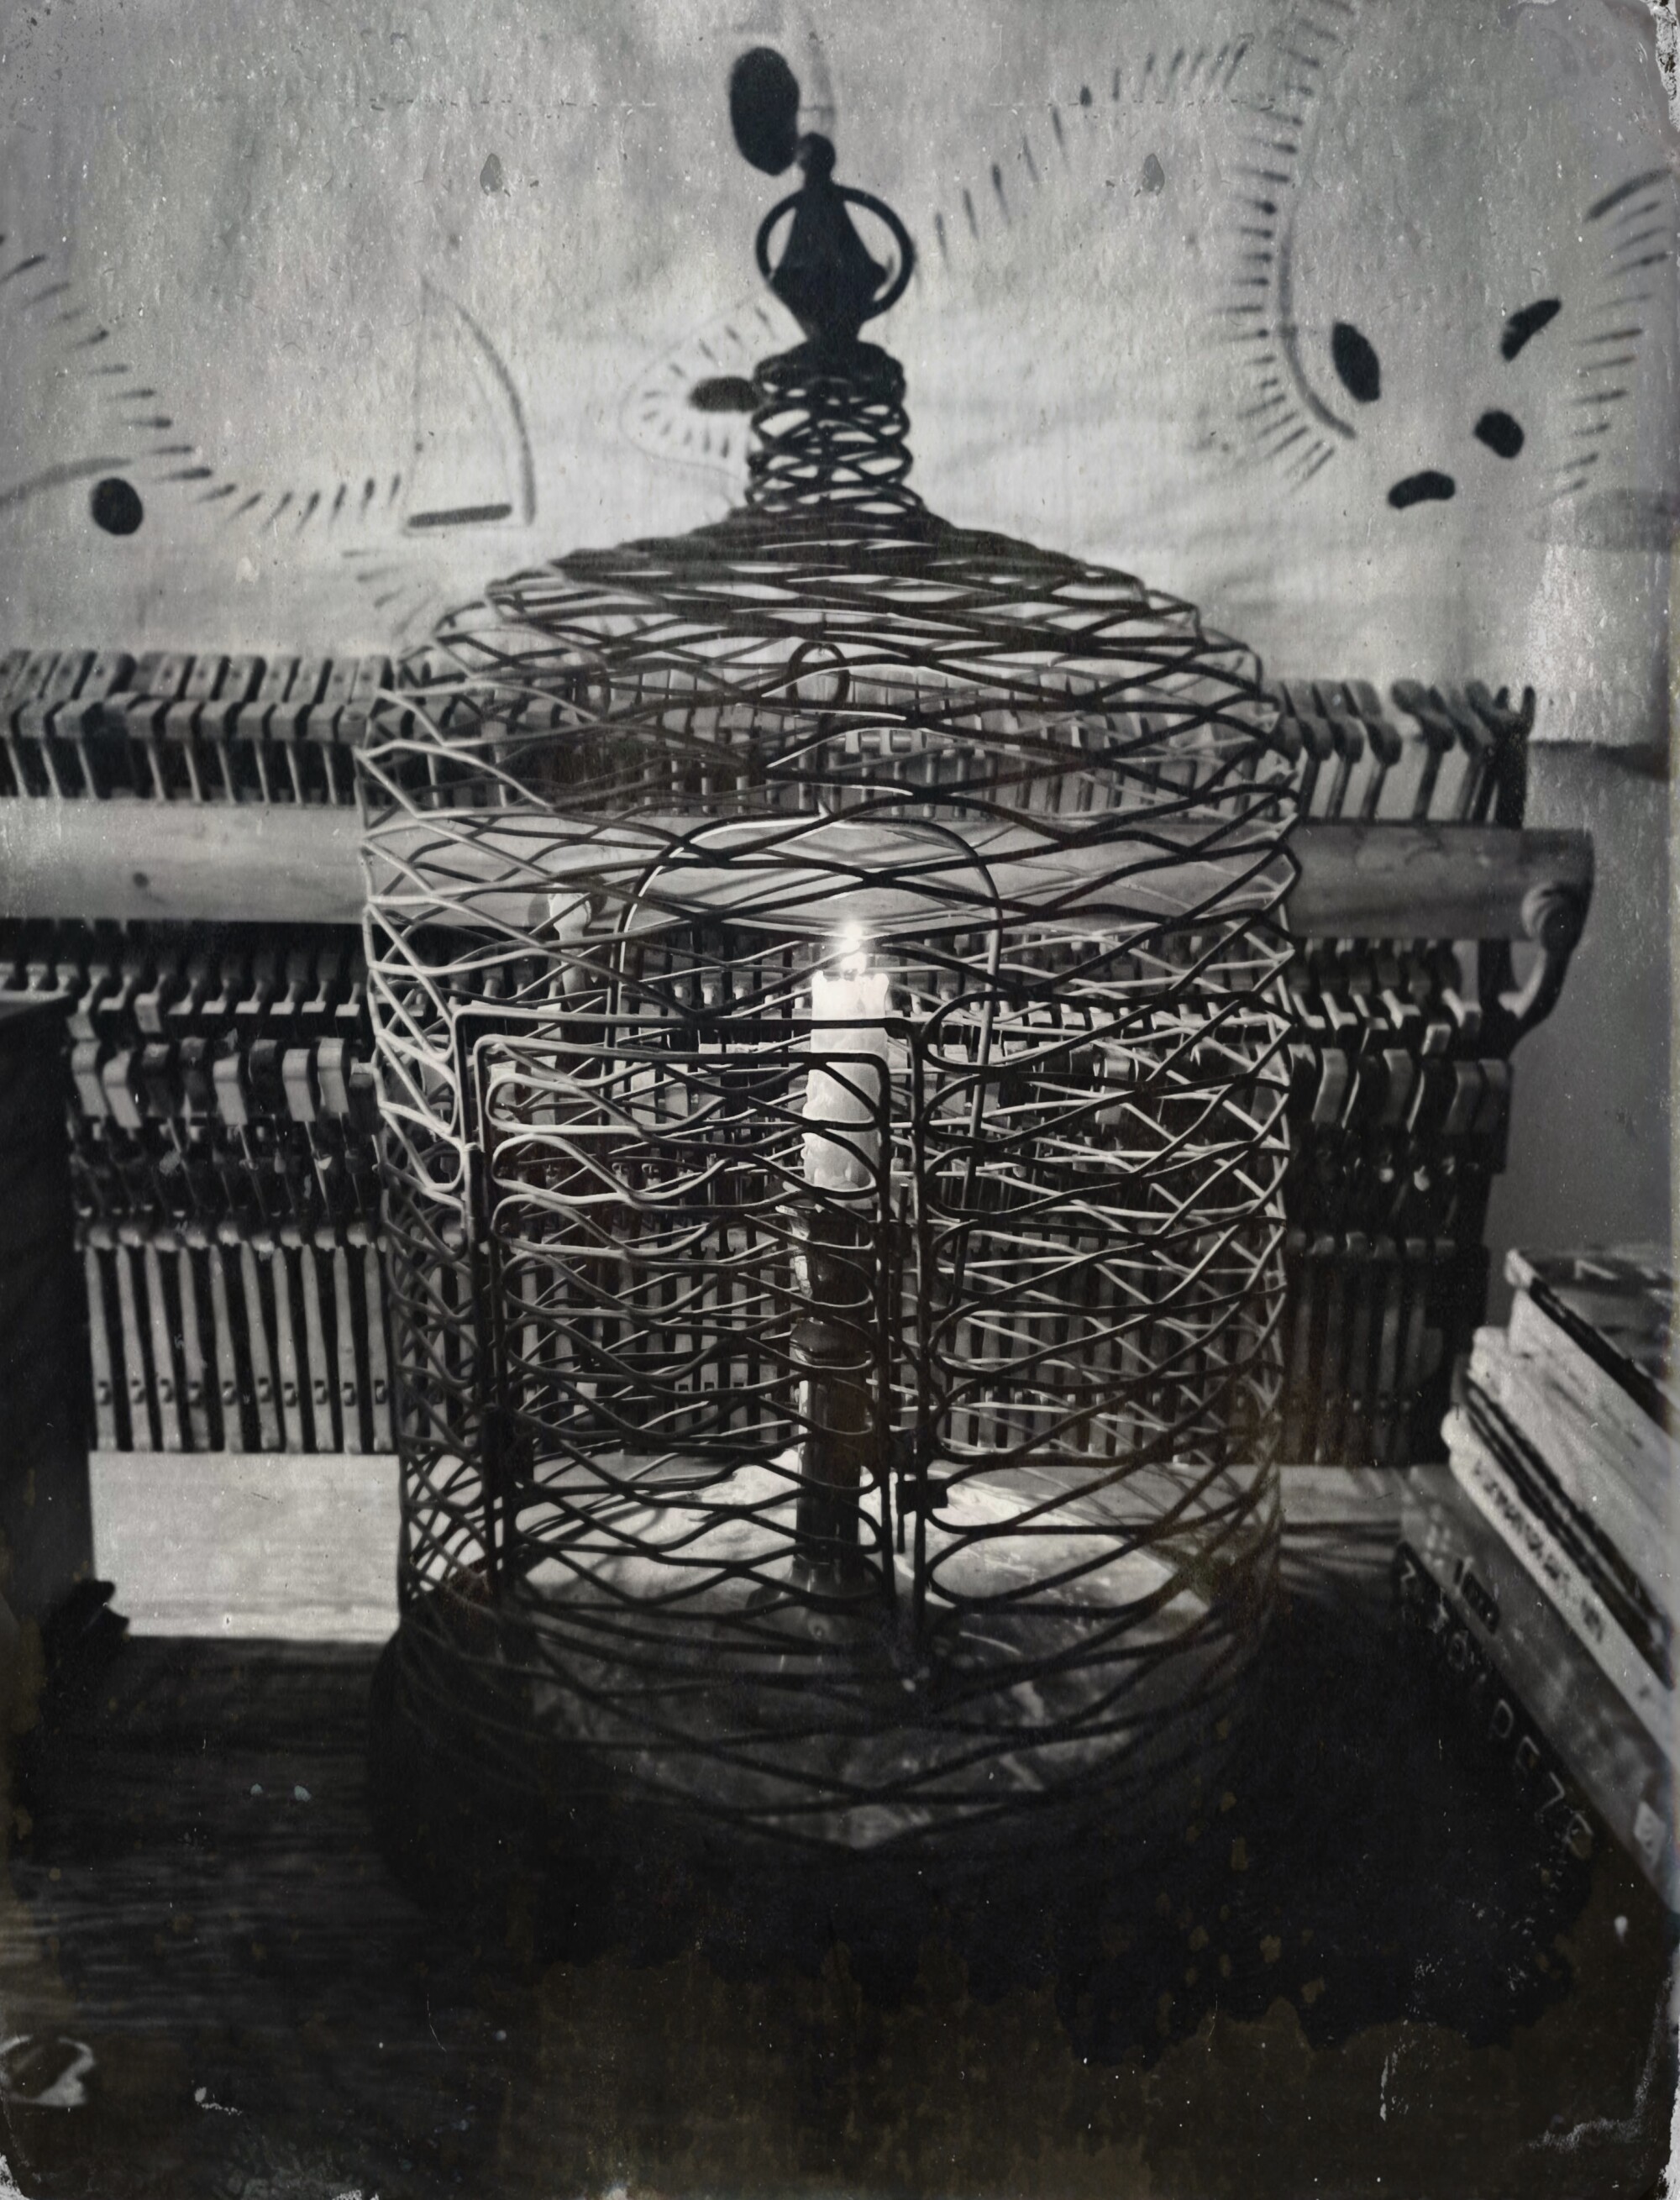 Photo of a bird cage found by Maciel Antunes — a "gift" from Anaïs Nin.